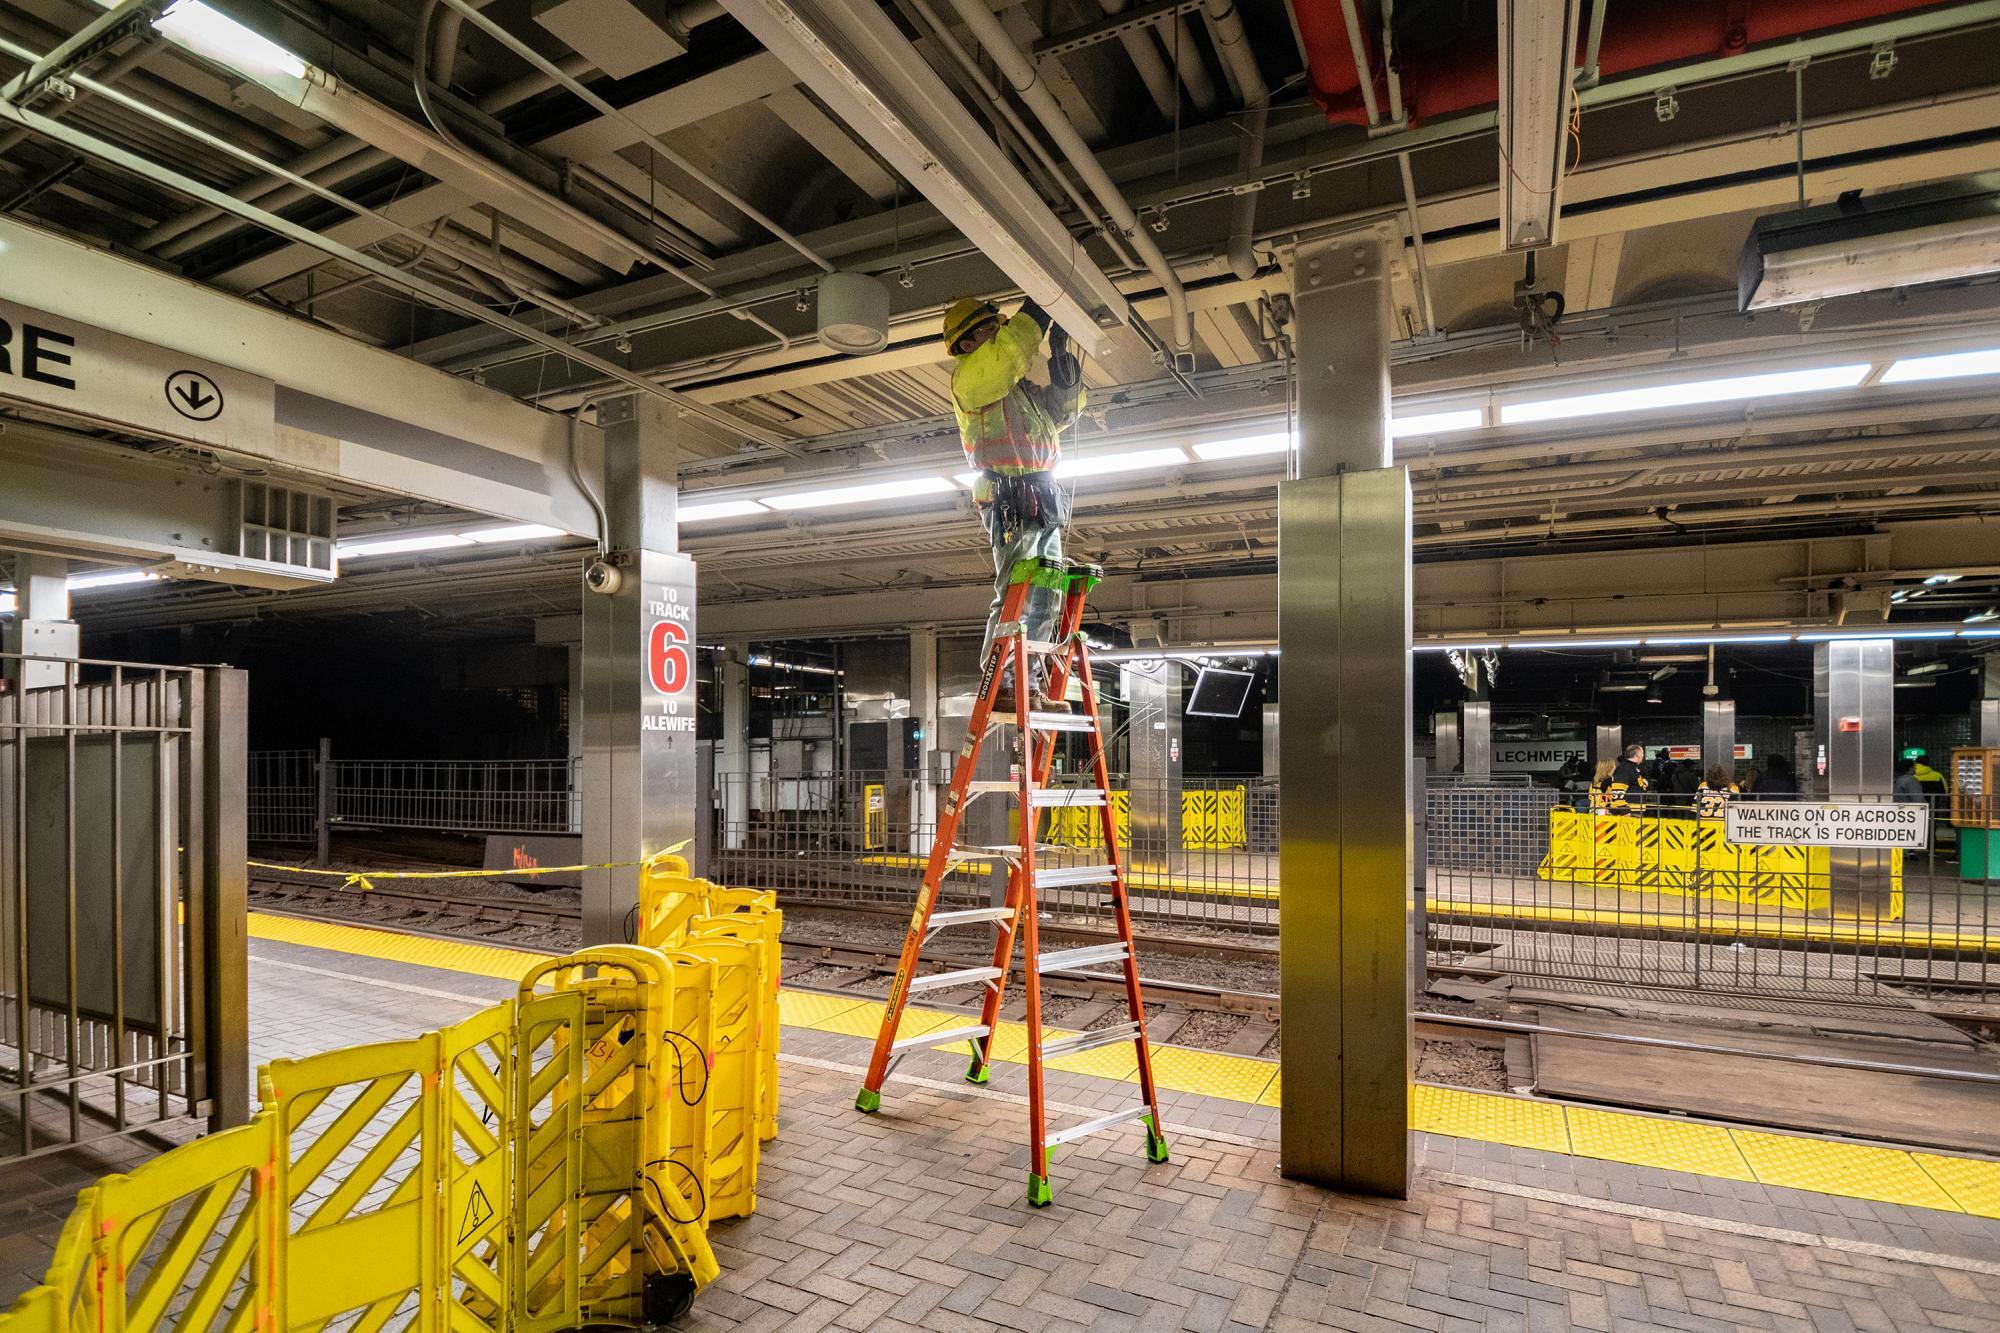 A crewman on a ladder installs new lights above the Green Line at Park Street